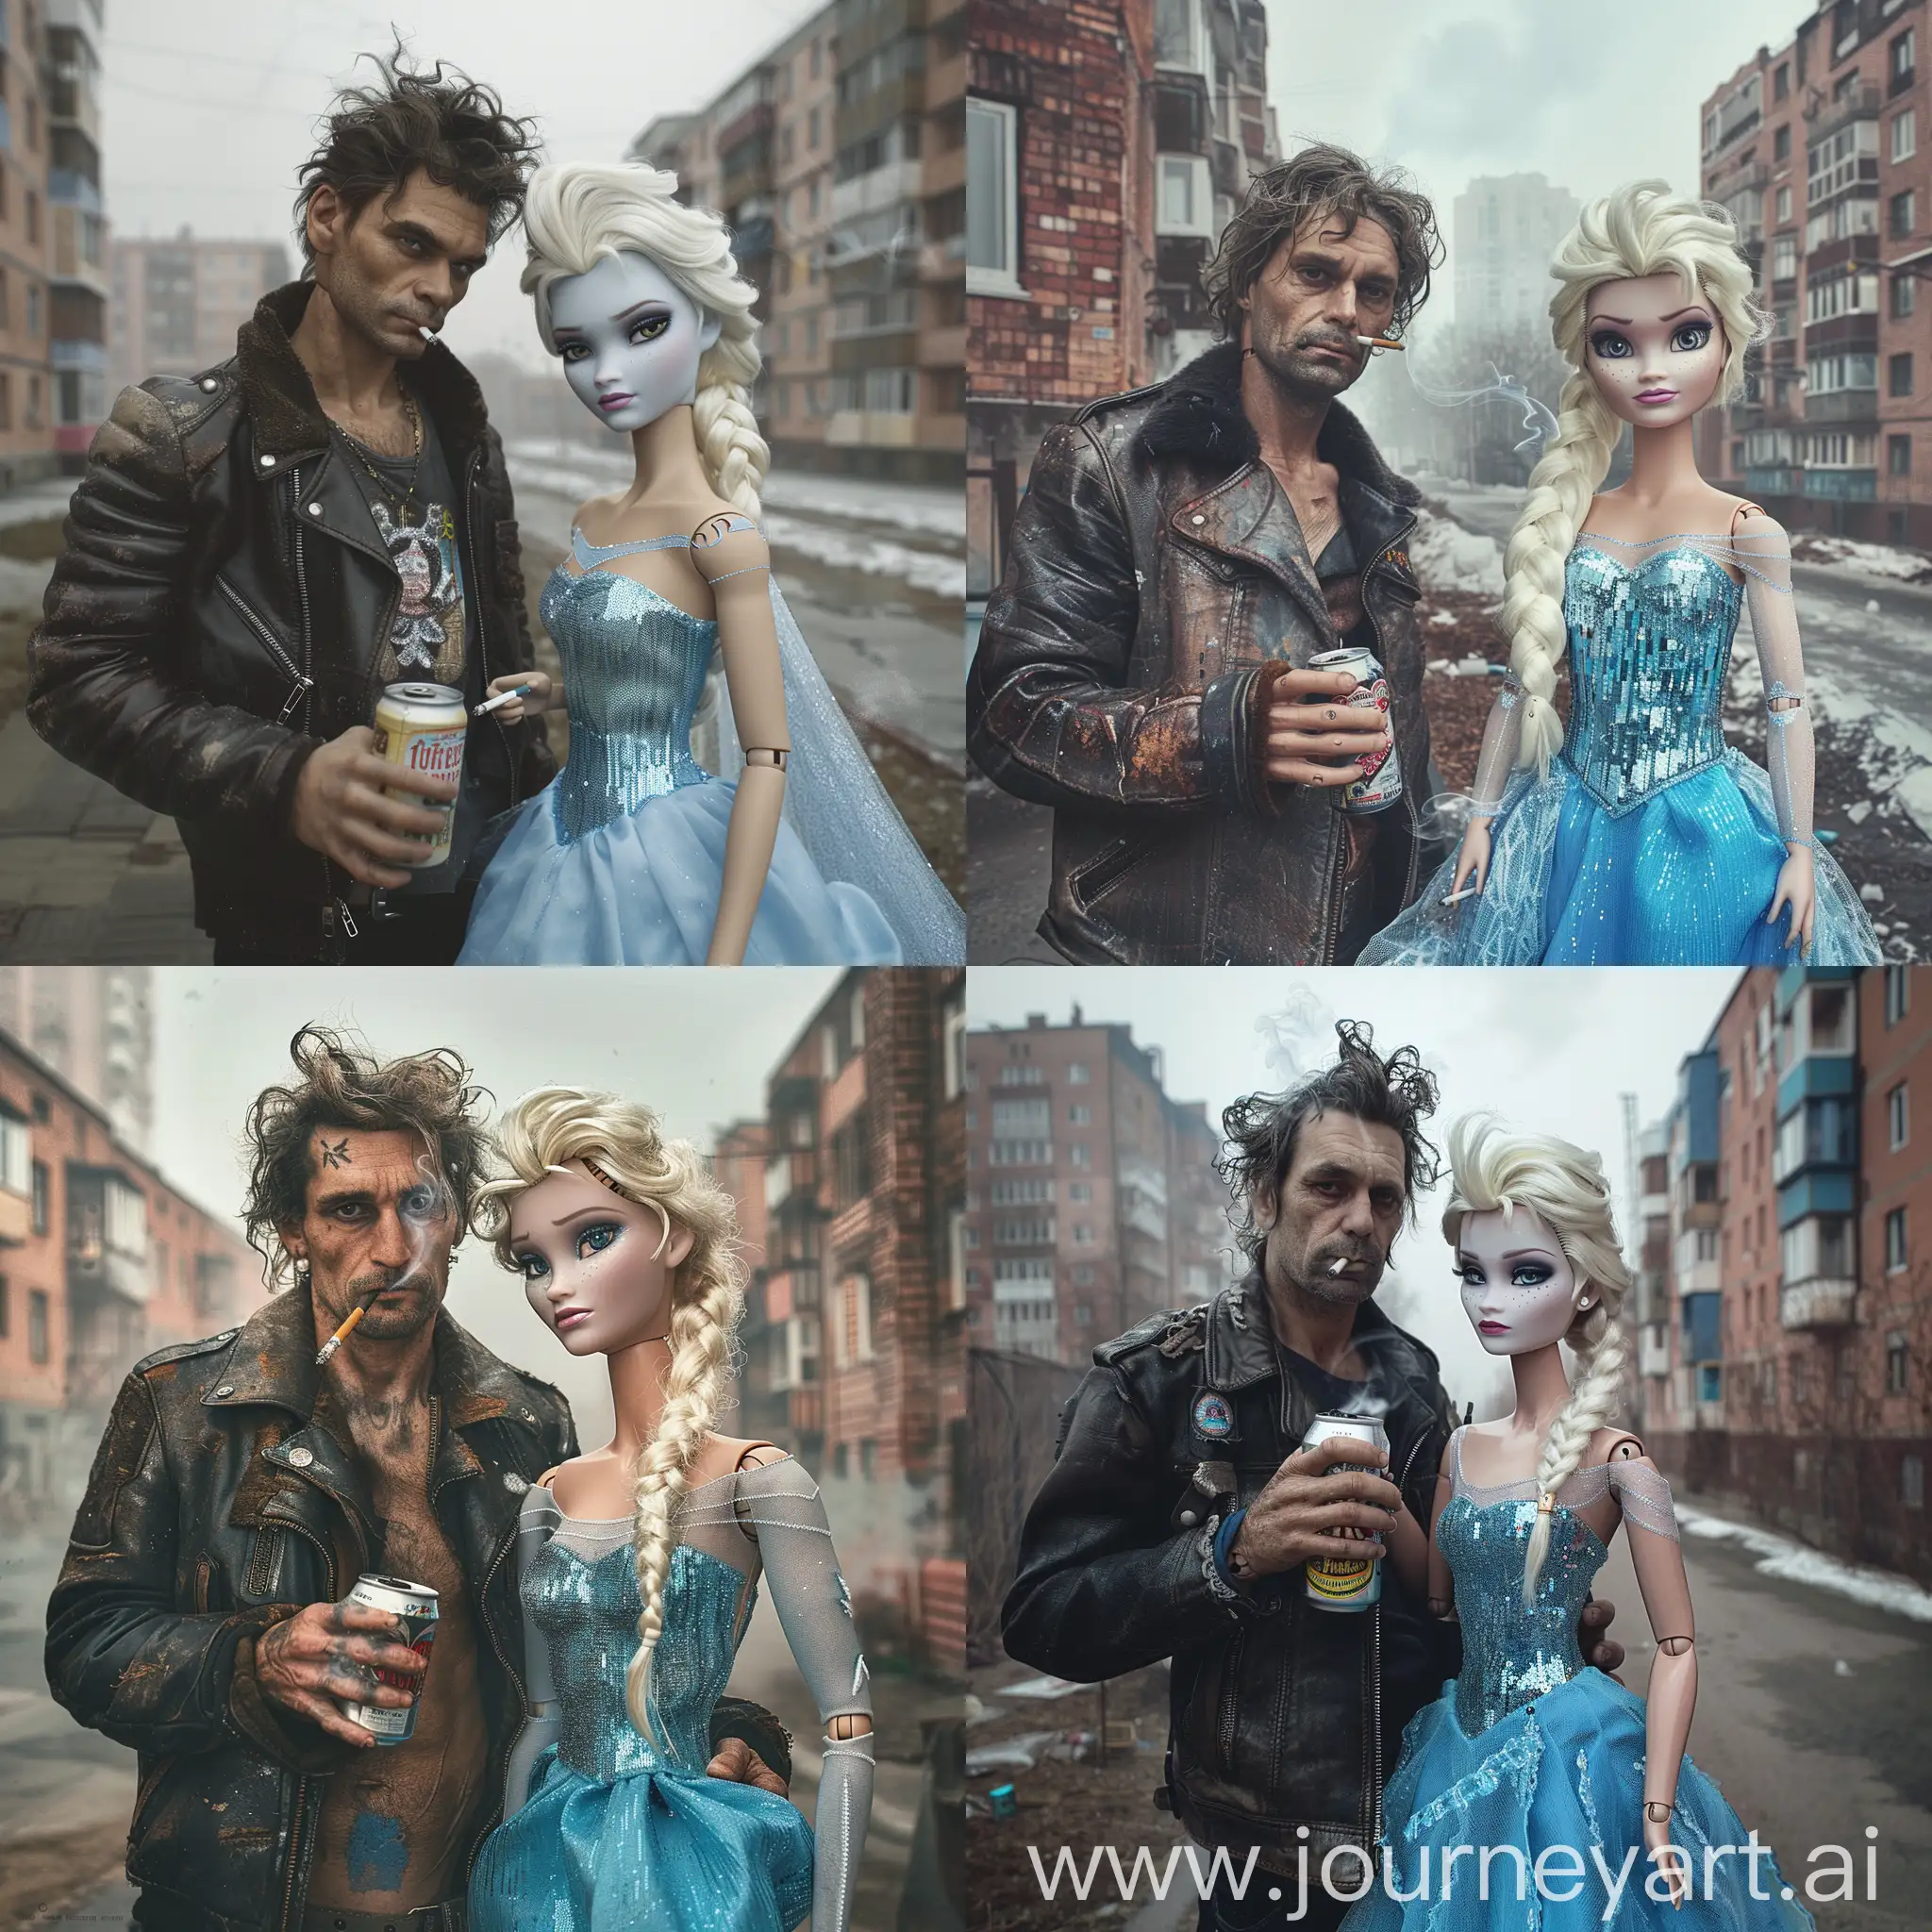 gritty urban street during a foggy day, rugged man with disheveled hair, worn leather jacket, holding a beer can, smoking cigarette, life-size doll resembling popular animated ice princess, platinum blonde braid, sparkling blue dress, sharp makeup, contrast between gritty realism and pristine surrealism, old soviet brick apartment buildings in background, muted color palette, grainy texture, high-definition, subtle vignette effect, soft focus background, eerie yet captivating.